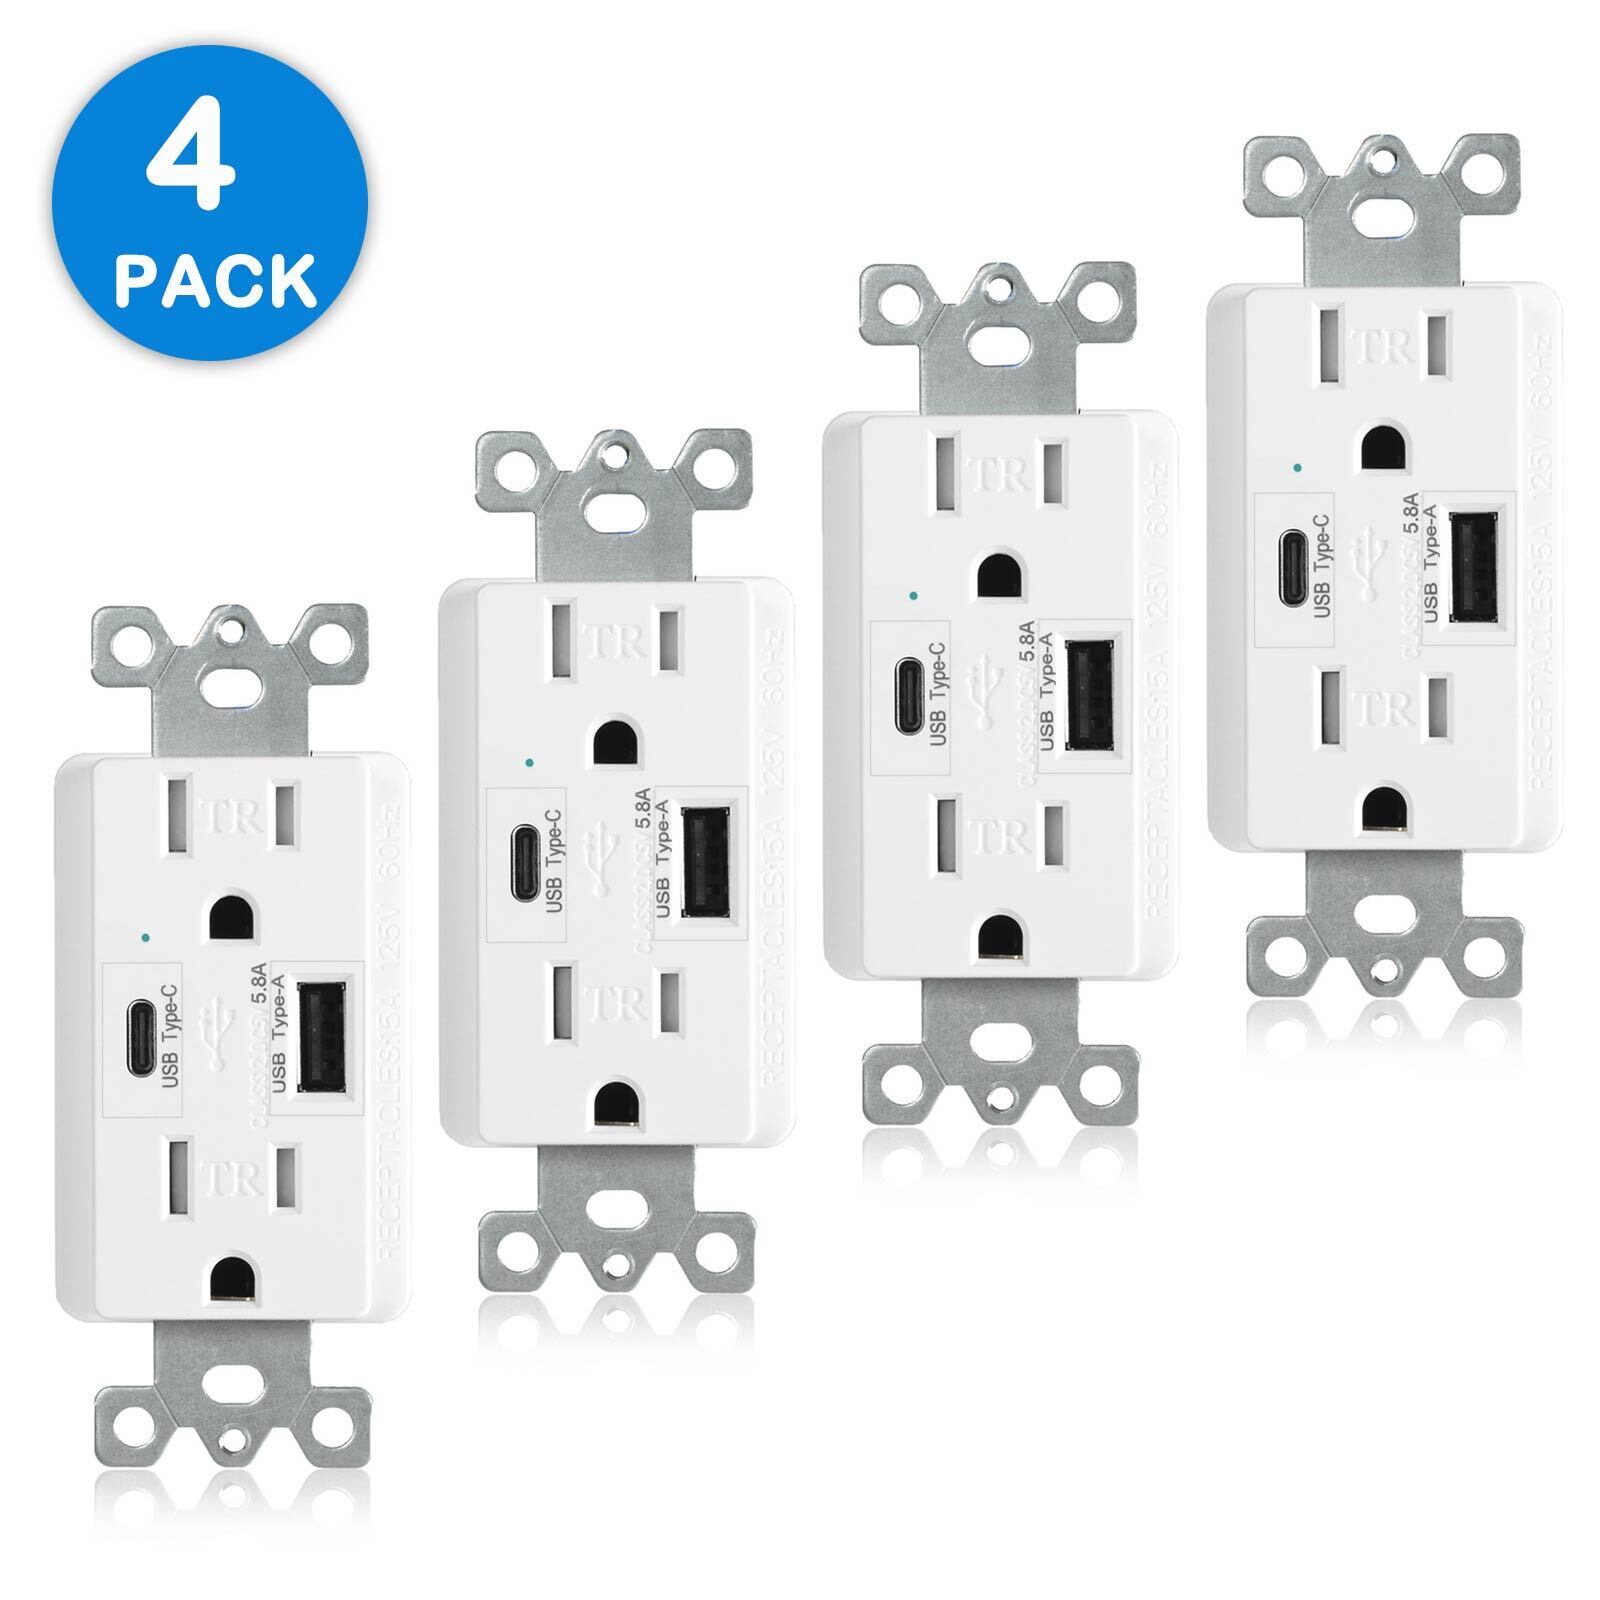 High Speed 5.8A Dual USB Type-C Outlet TR In-Wall Charger Receptacle White 4PACK